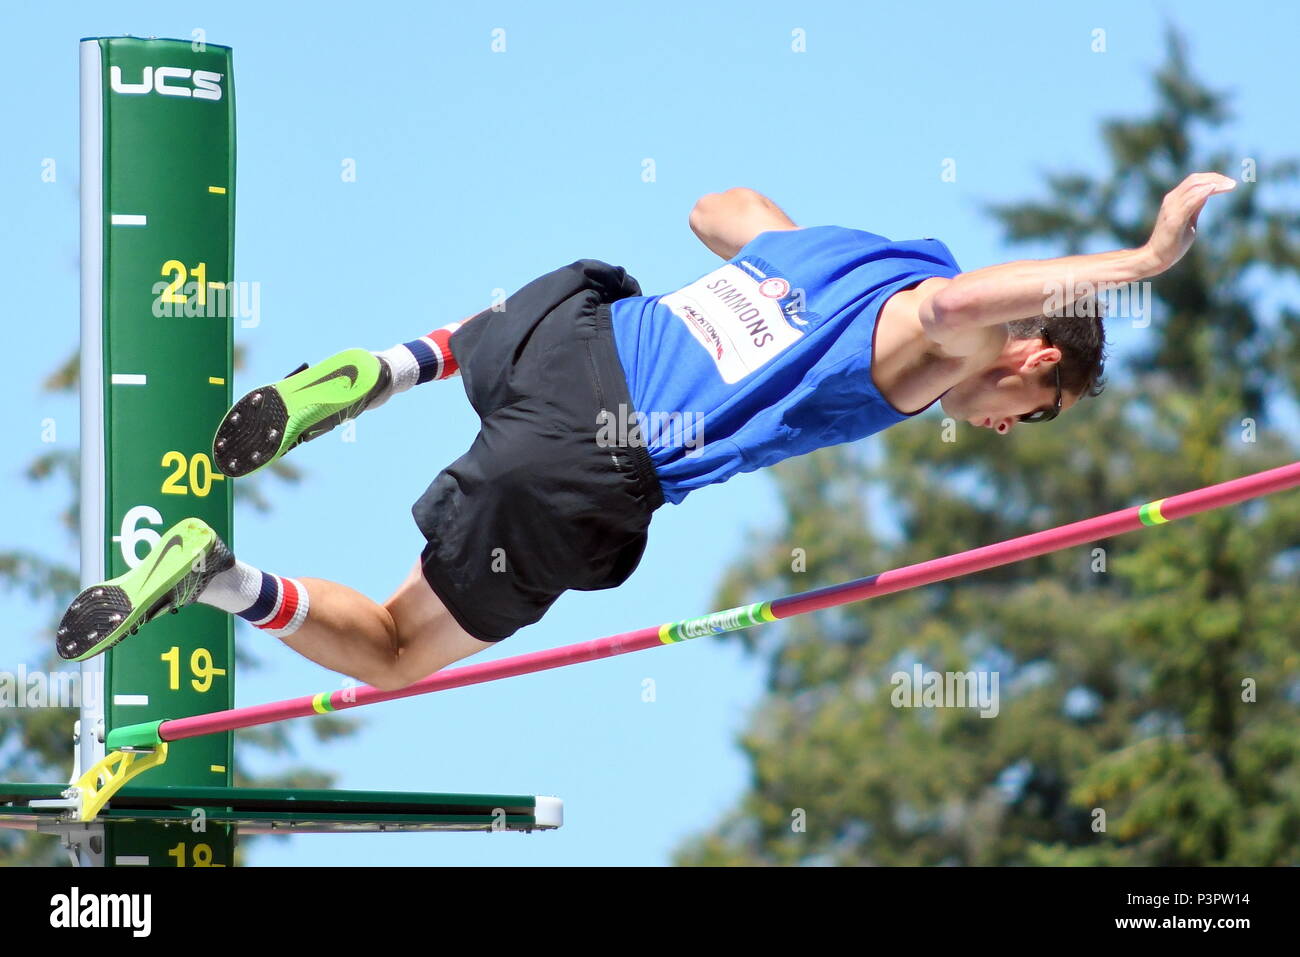 U.S. Air Force 1st Lt. Cale Simmons competes in the men's pole vault preliminaries on July 2, 2016, during the U.S. Olympic Track and Field Team Trials on July 2,2016. (U.S. Air Force photo/courtesy Tom "Drac" Williams/released) Stock Photo